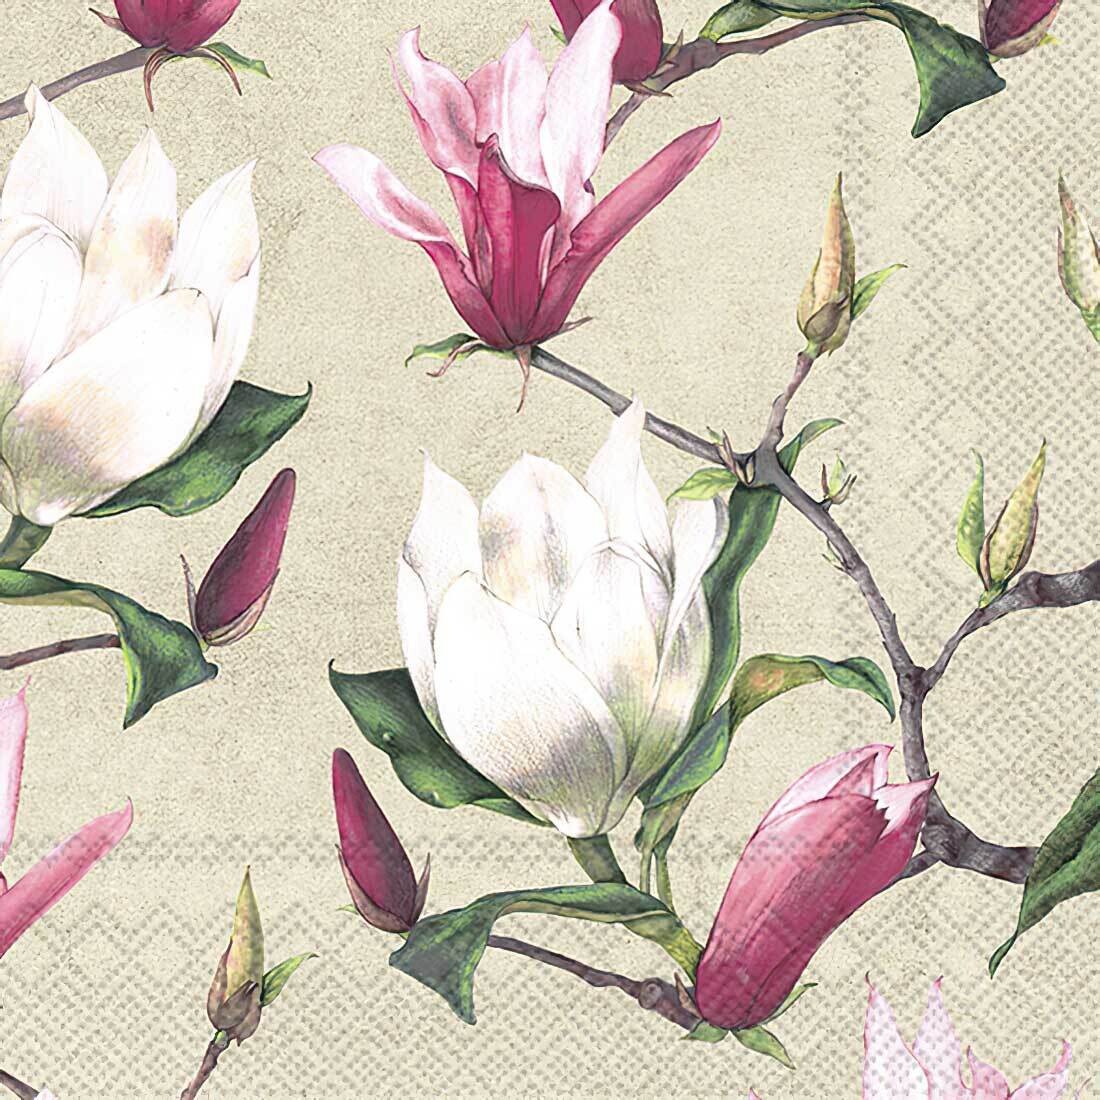 Decoupage Paper Napkins - Floral - Wake Up In Spring Cream
(1 Sheet) Out of Stock